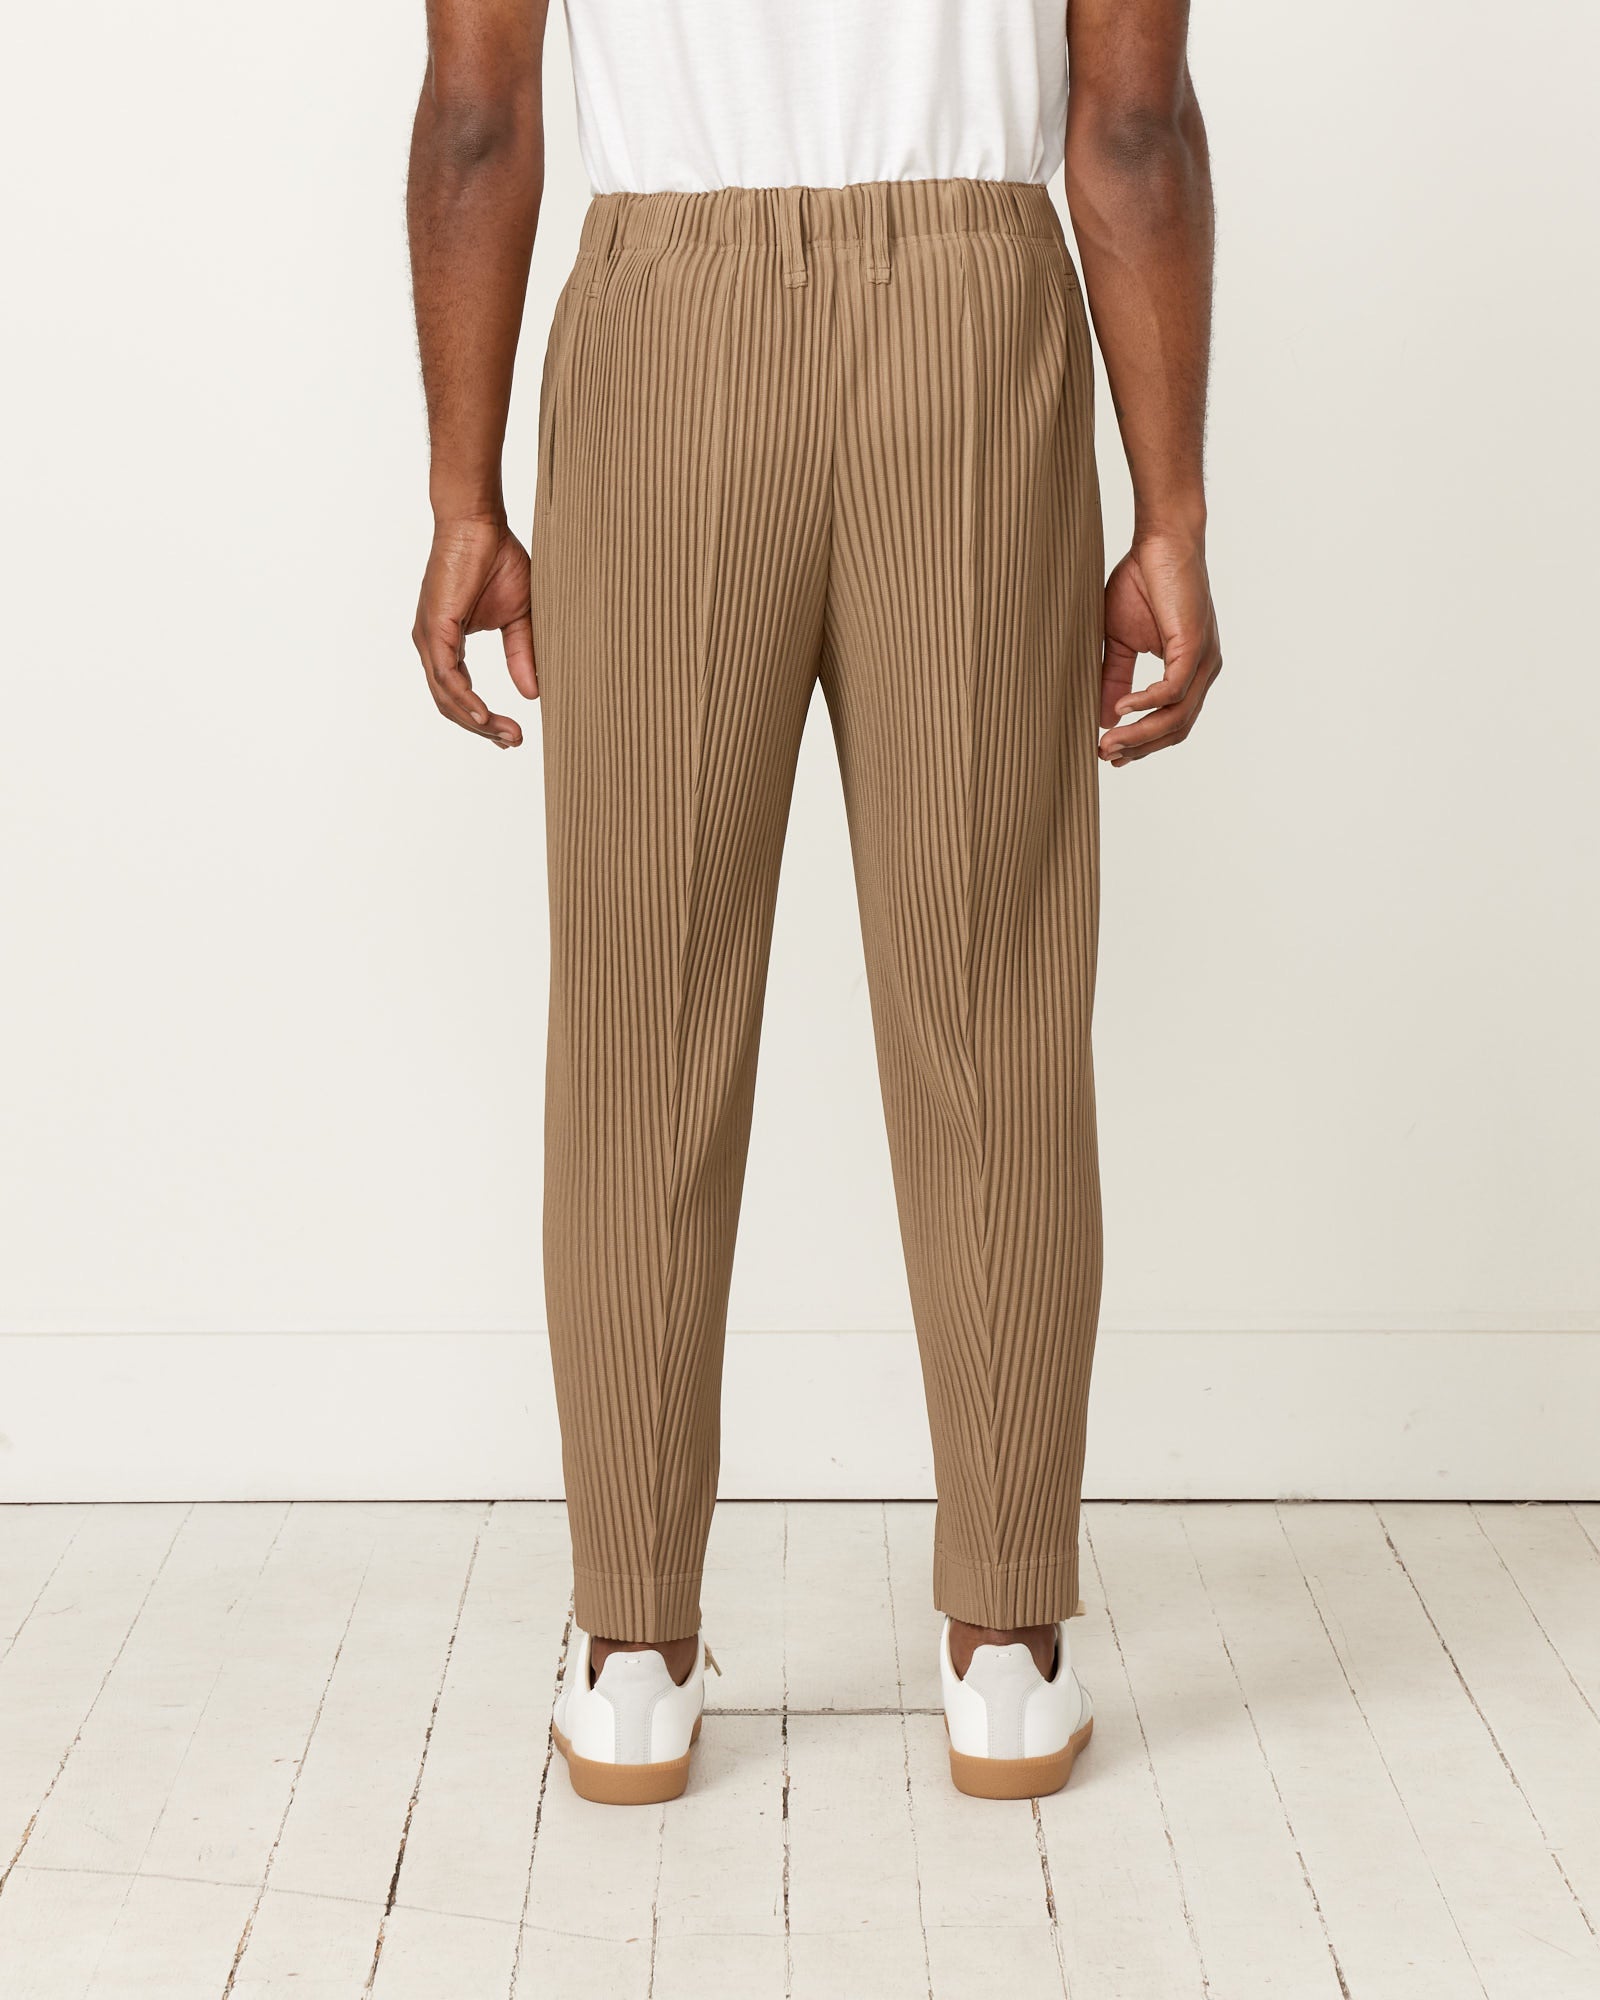 Compleat Trouser in Light Mocha Brown